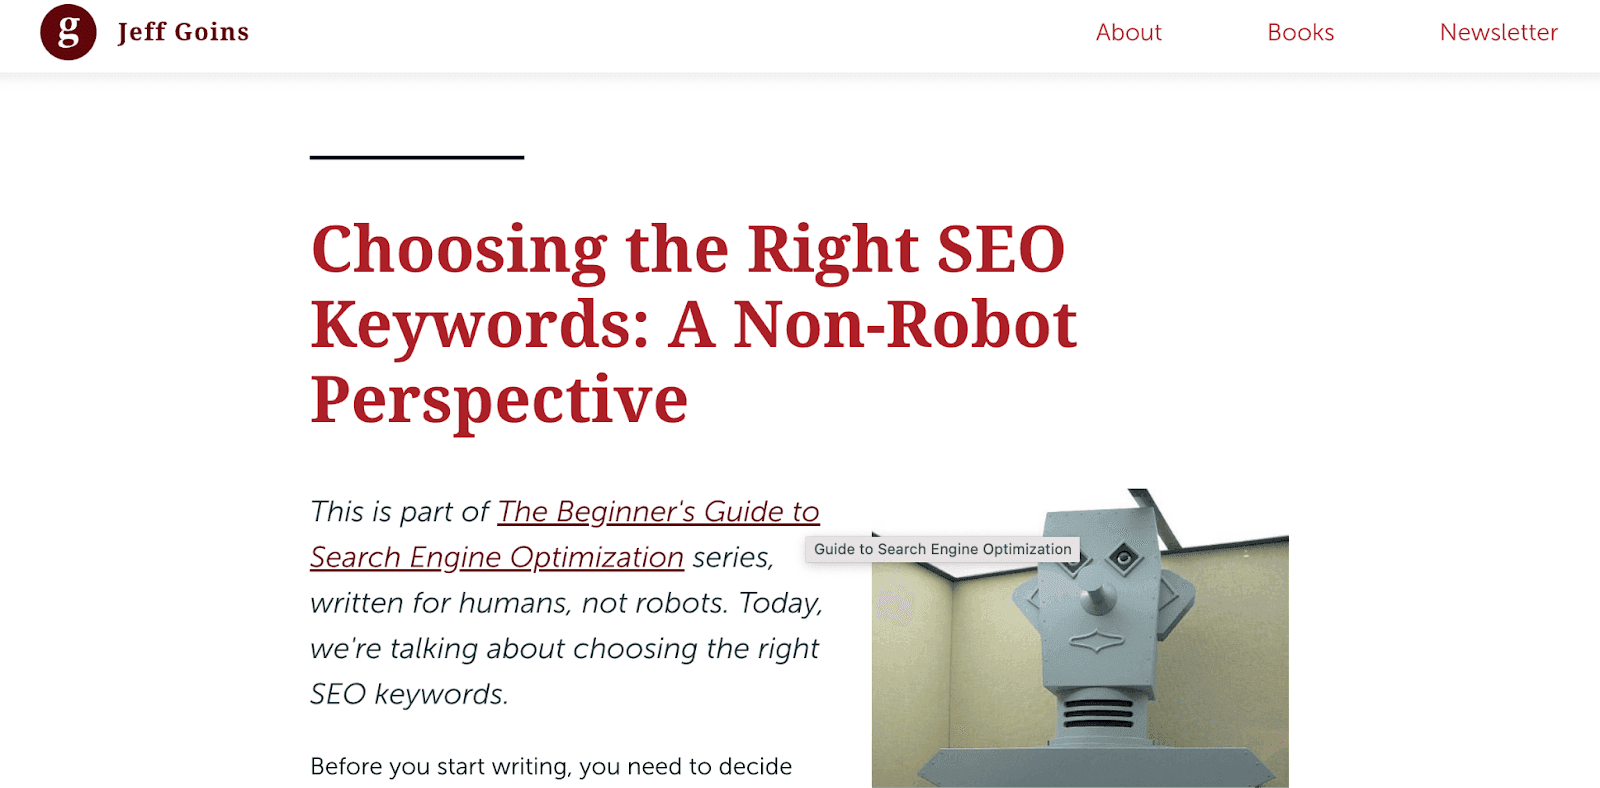 Jeff Goins presents choosing the right seo keywords: A non-robot perspective.